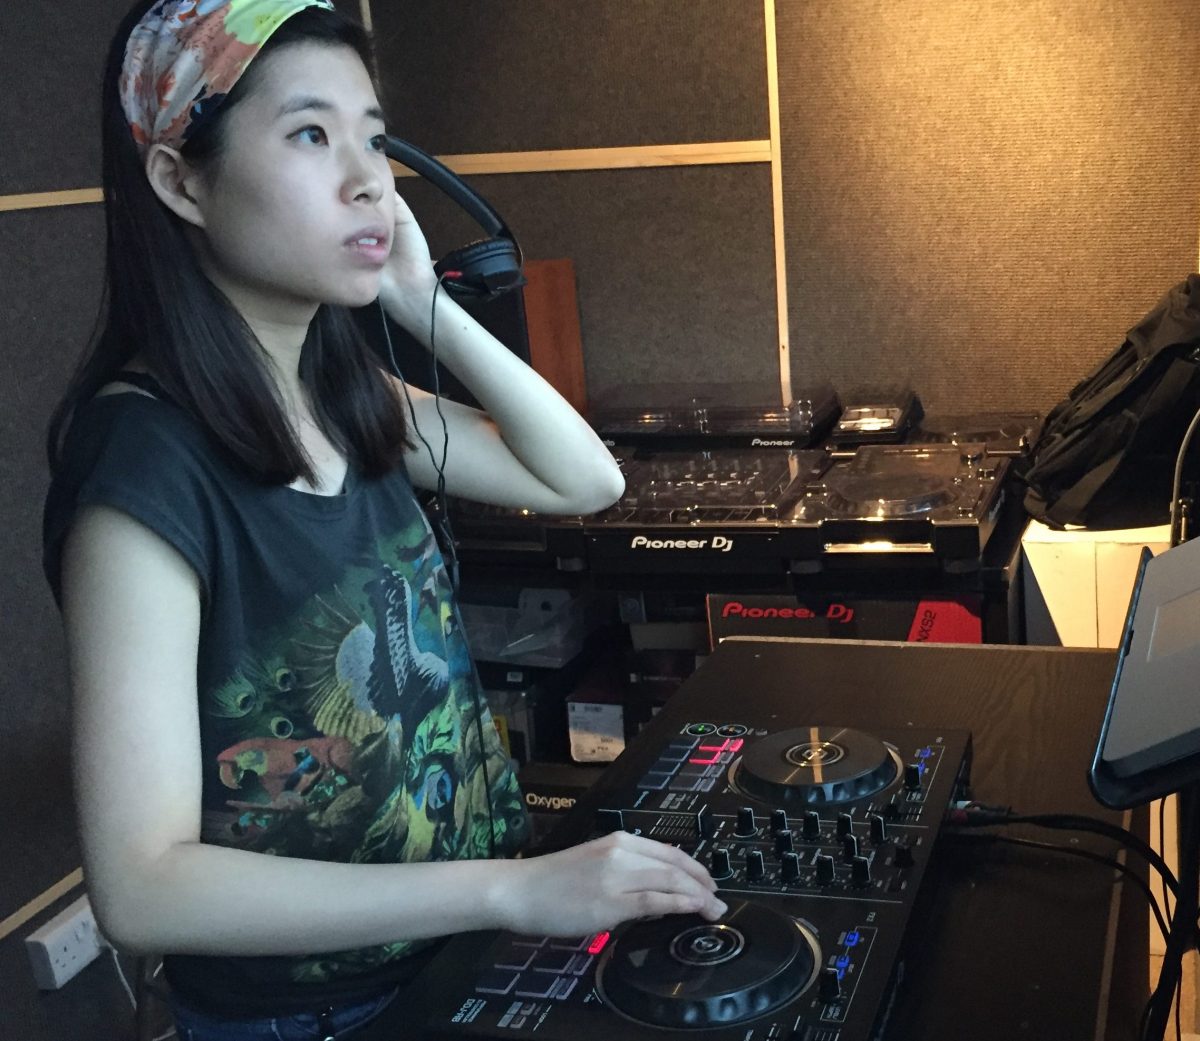 Learn To To DJ at On The Rise DJ Academy / Abigail /-Student